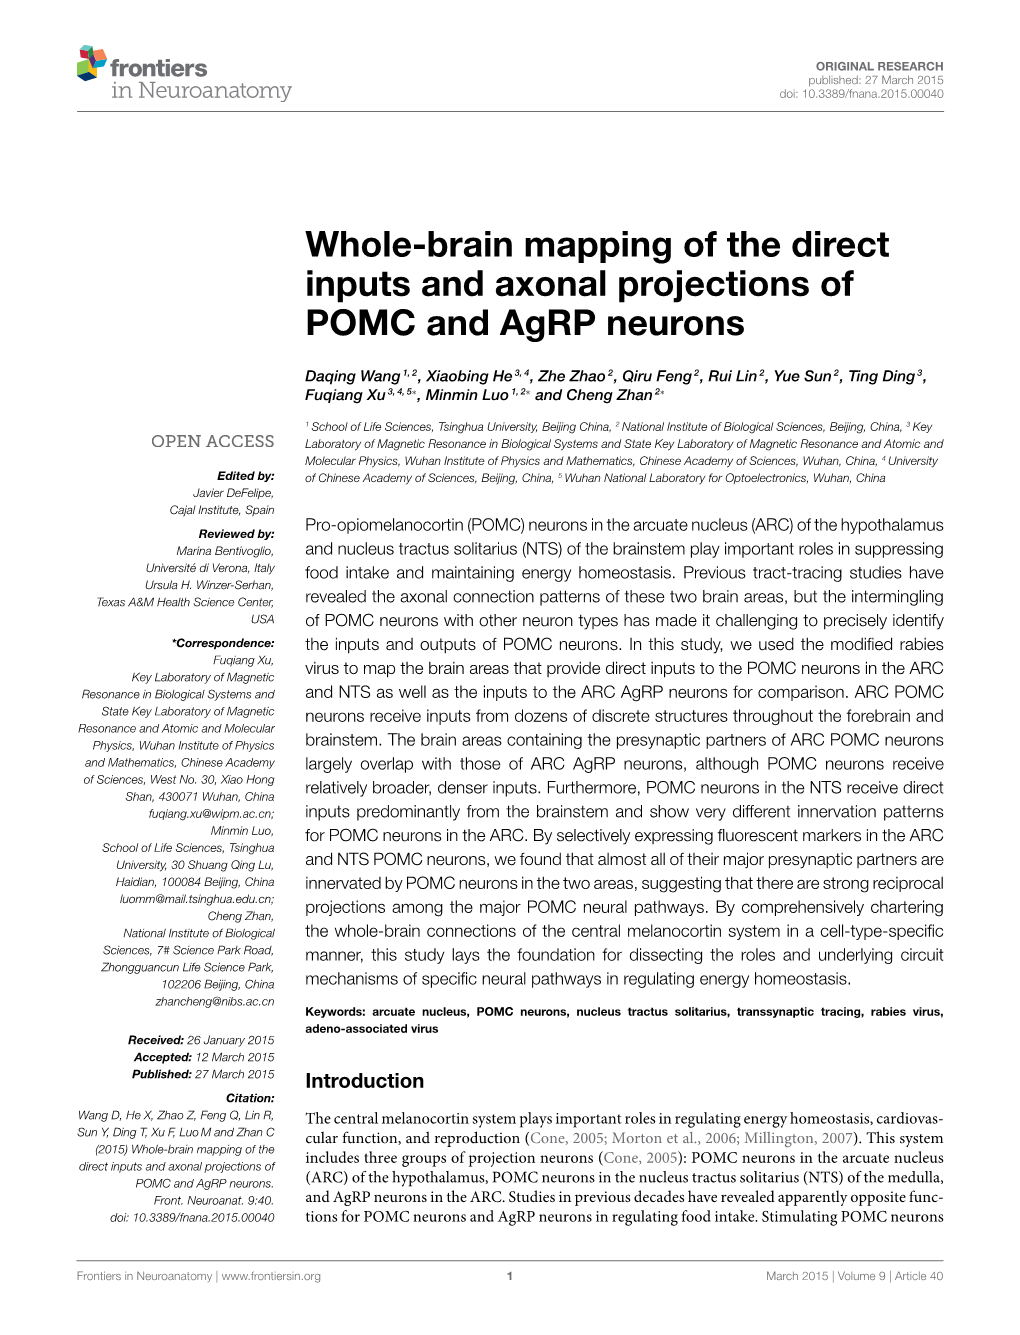 Whole-Brain Mapping of the Direct Inputs and Axonal Projections of POMC and Agrp Neurons